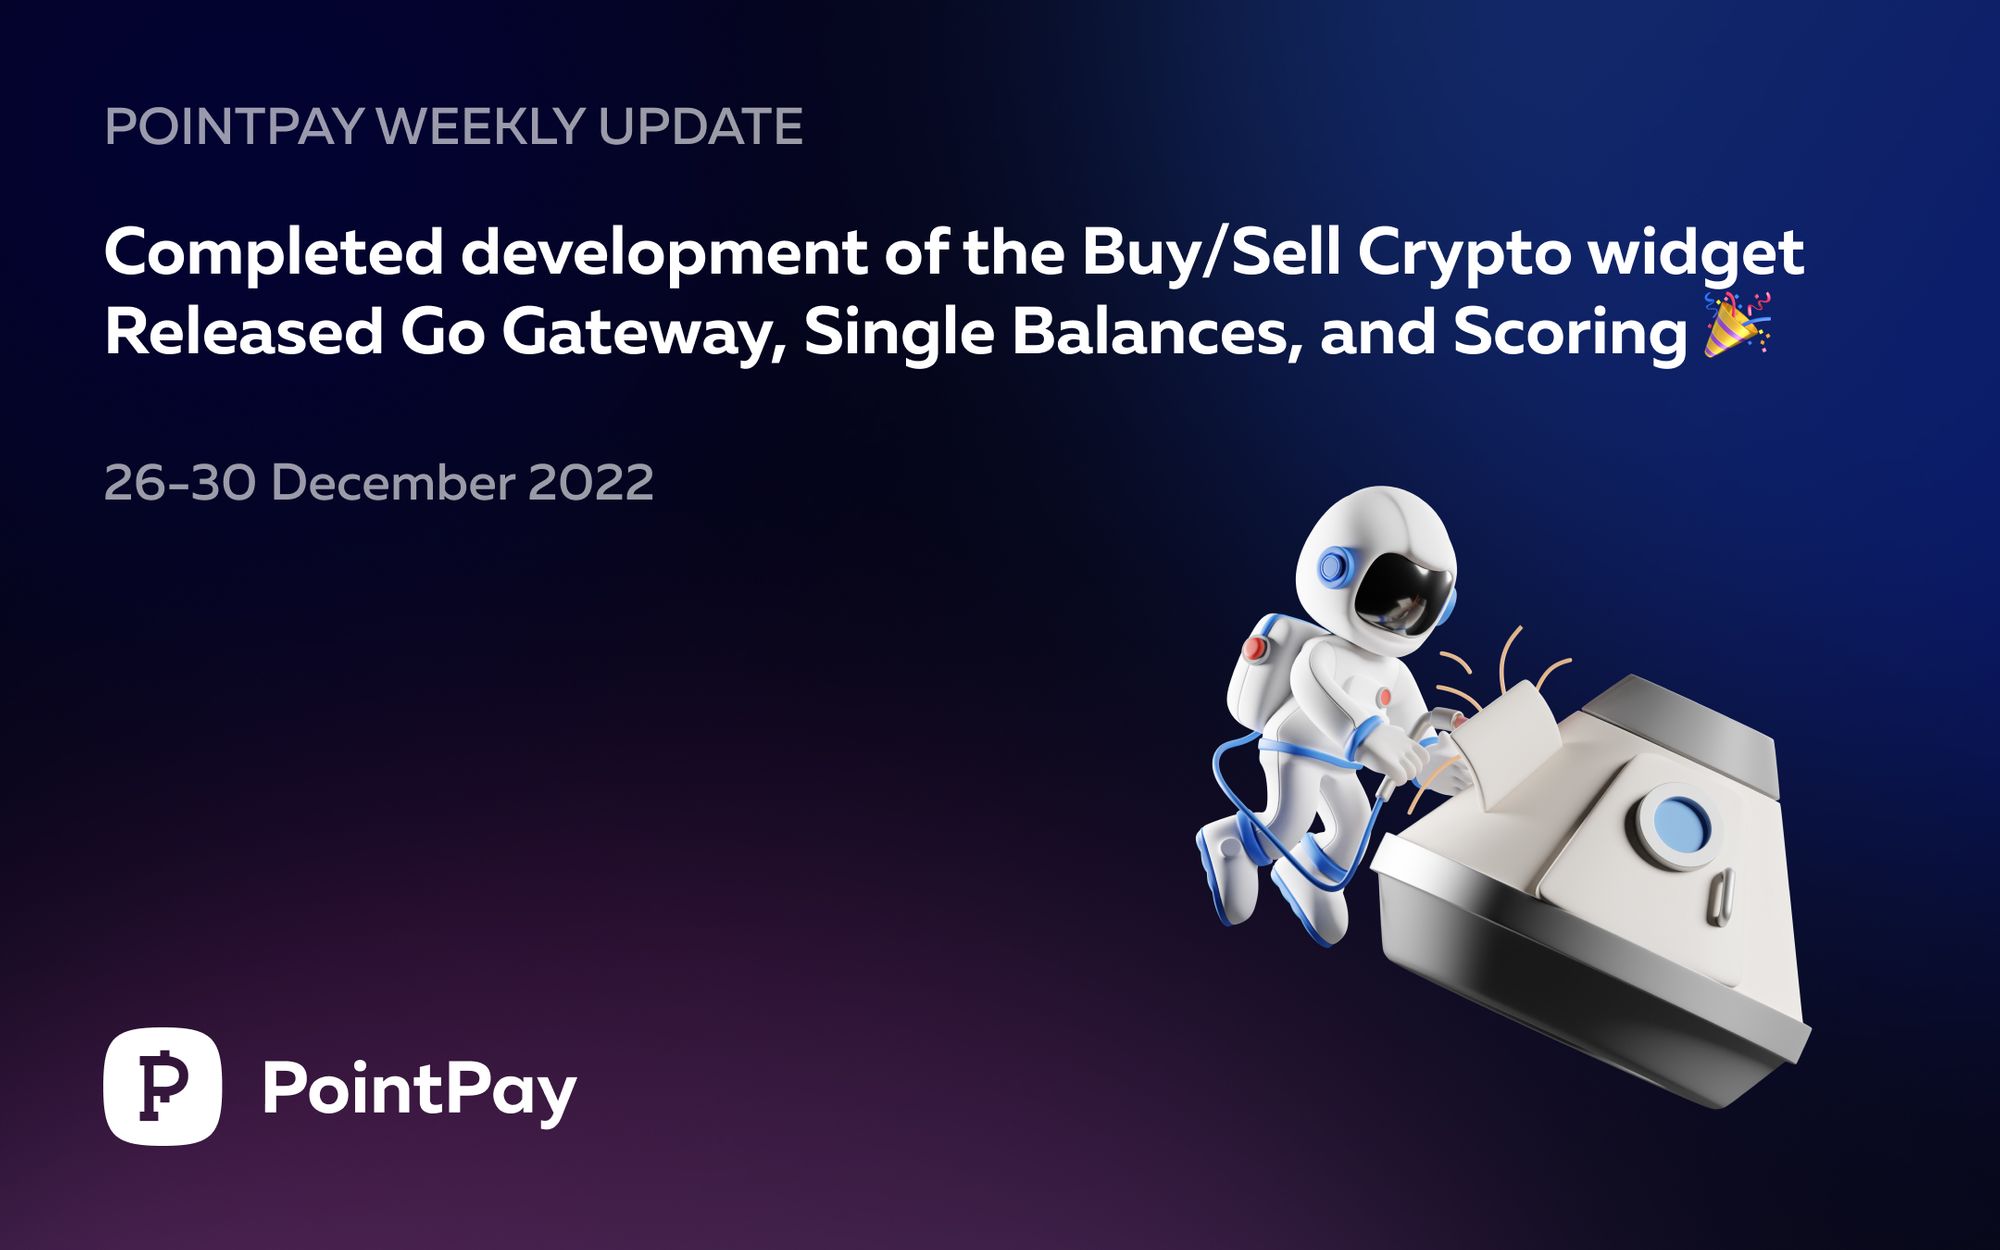 PointPay Weekly Update (26 - 30 December 2022)